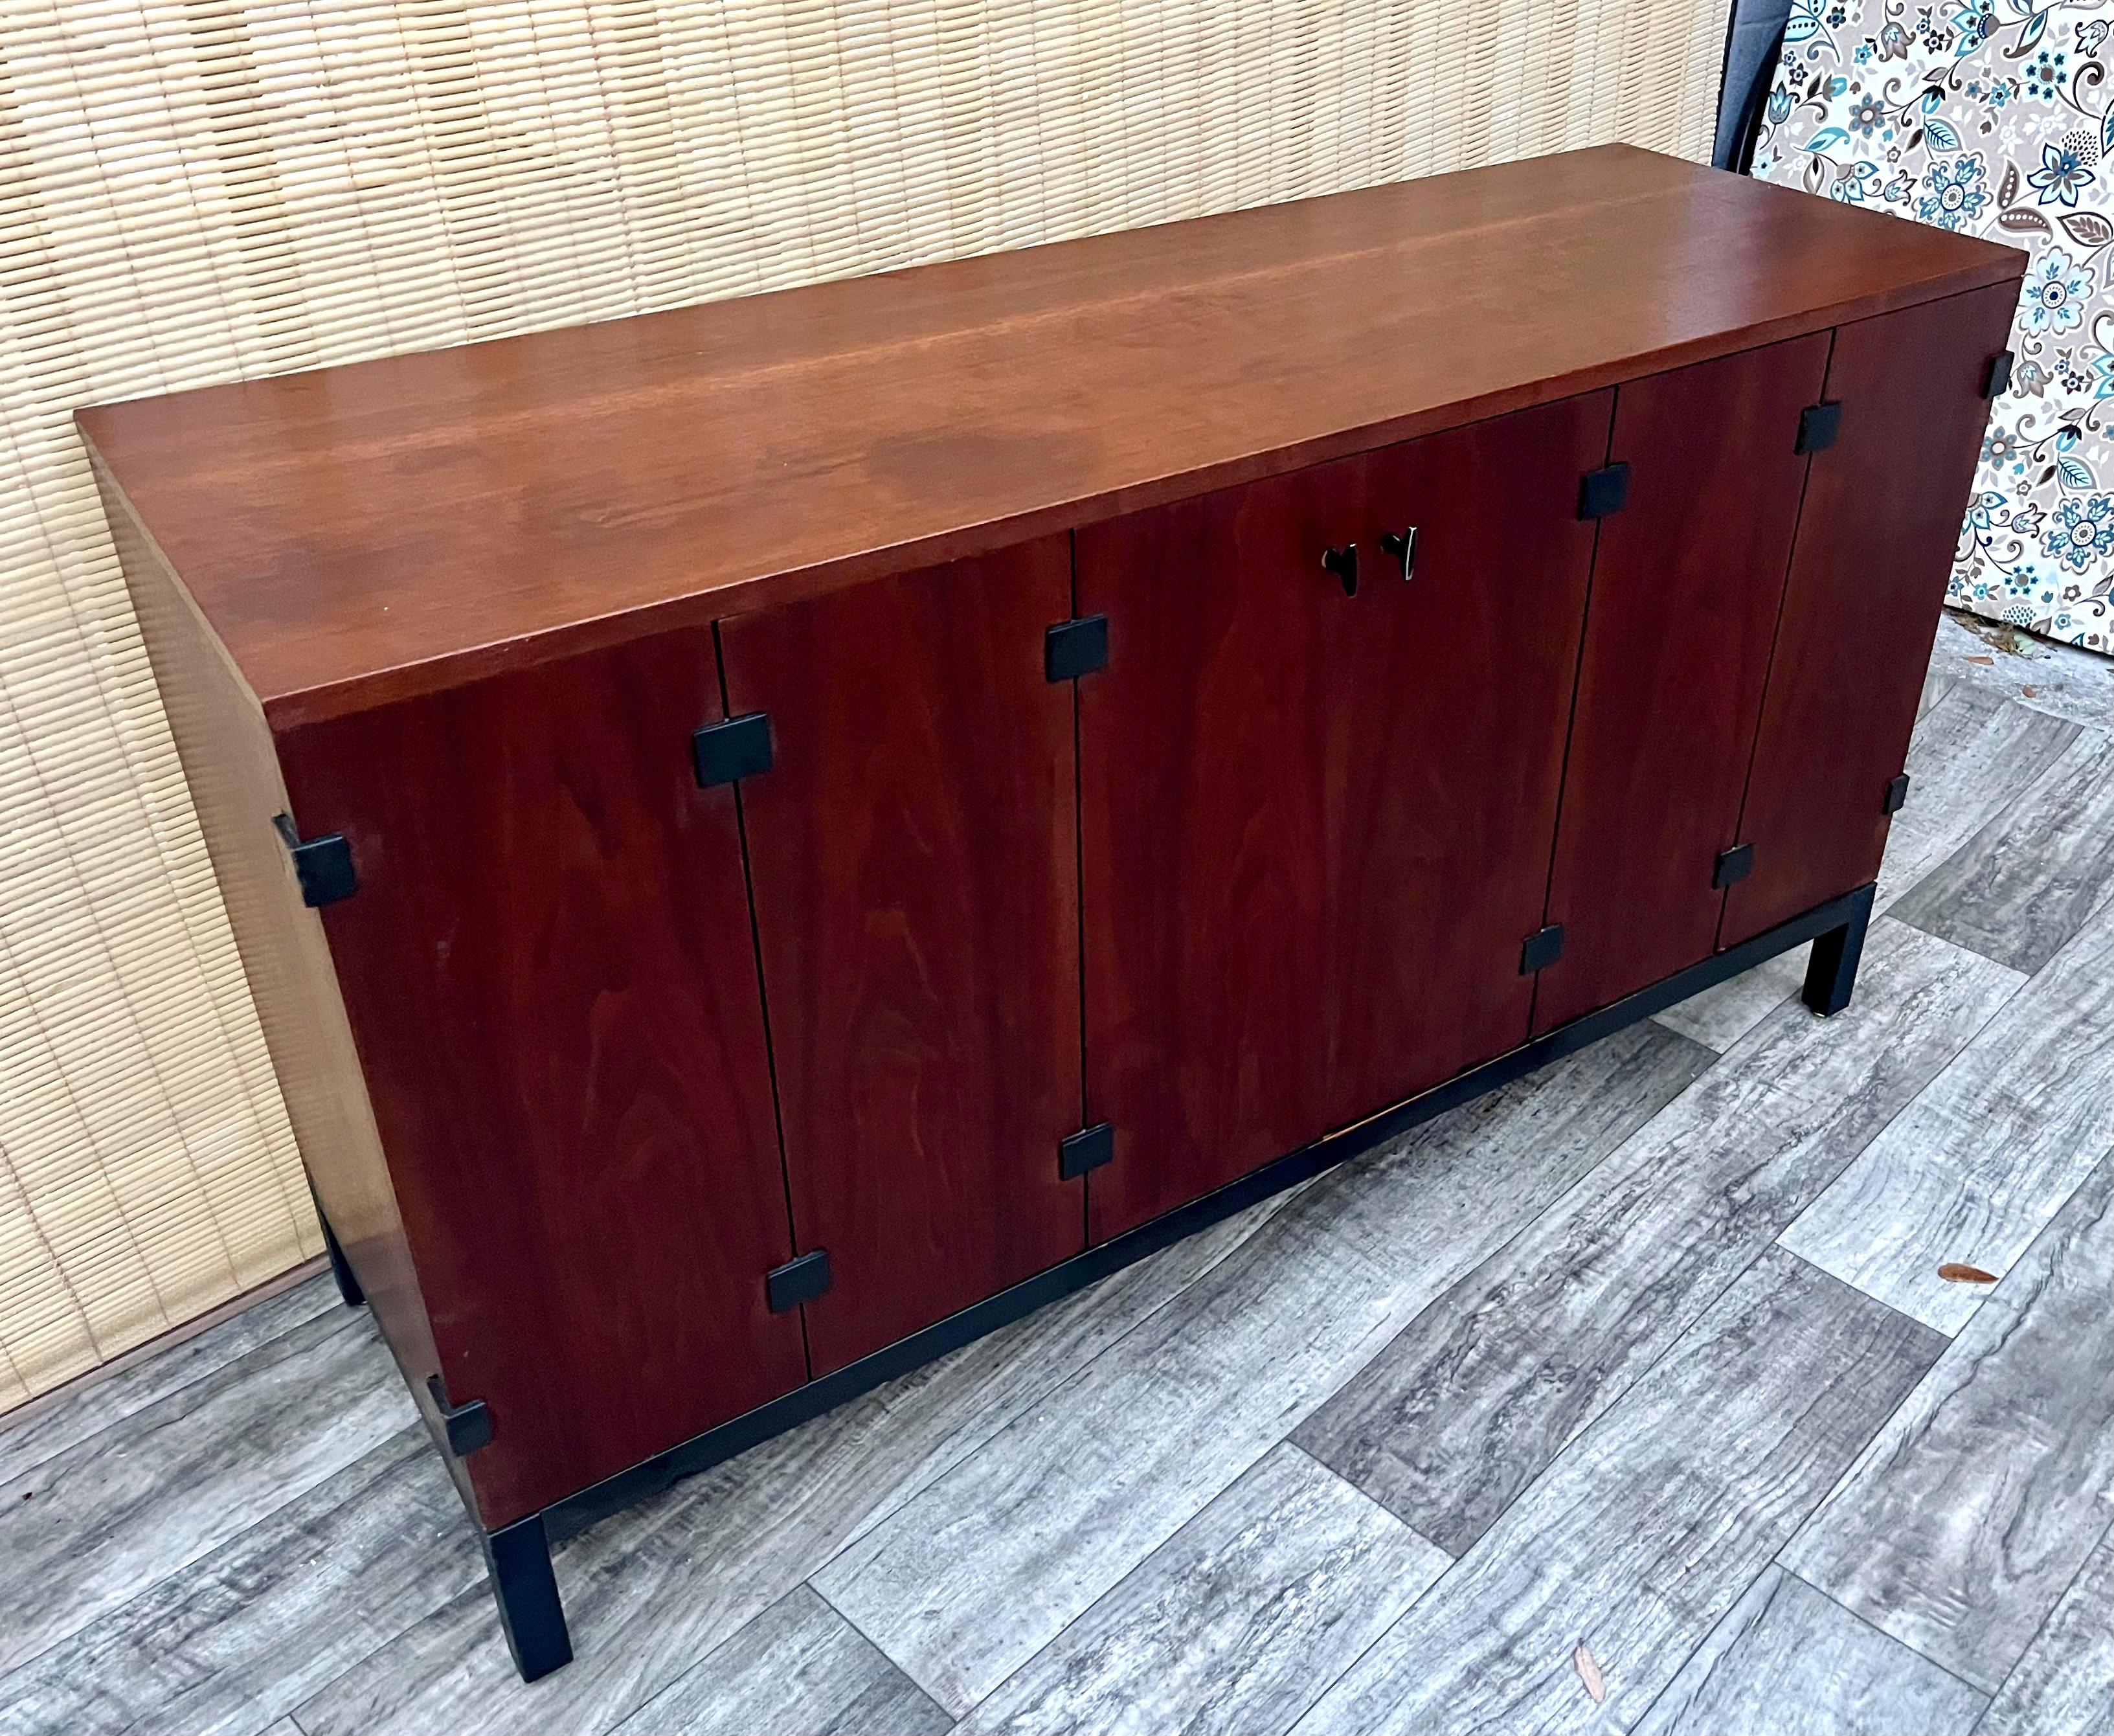 American Mid Century Sideboard Credenza by Milo Baughman for Directional. Circa 1960s